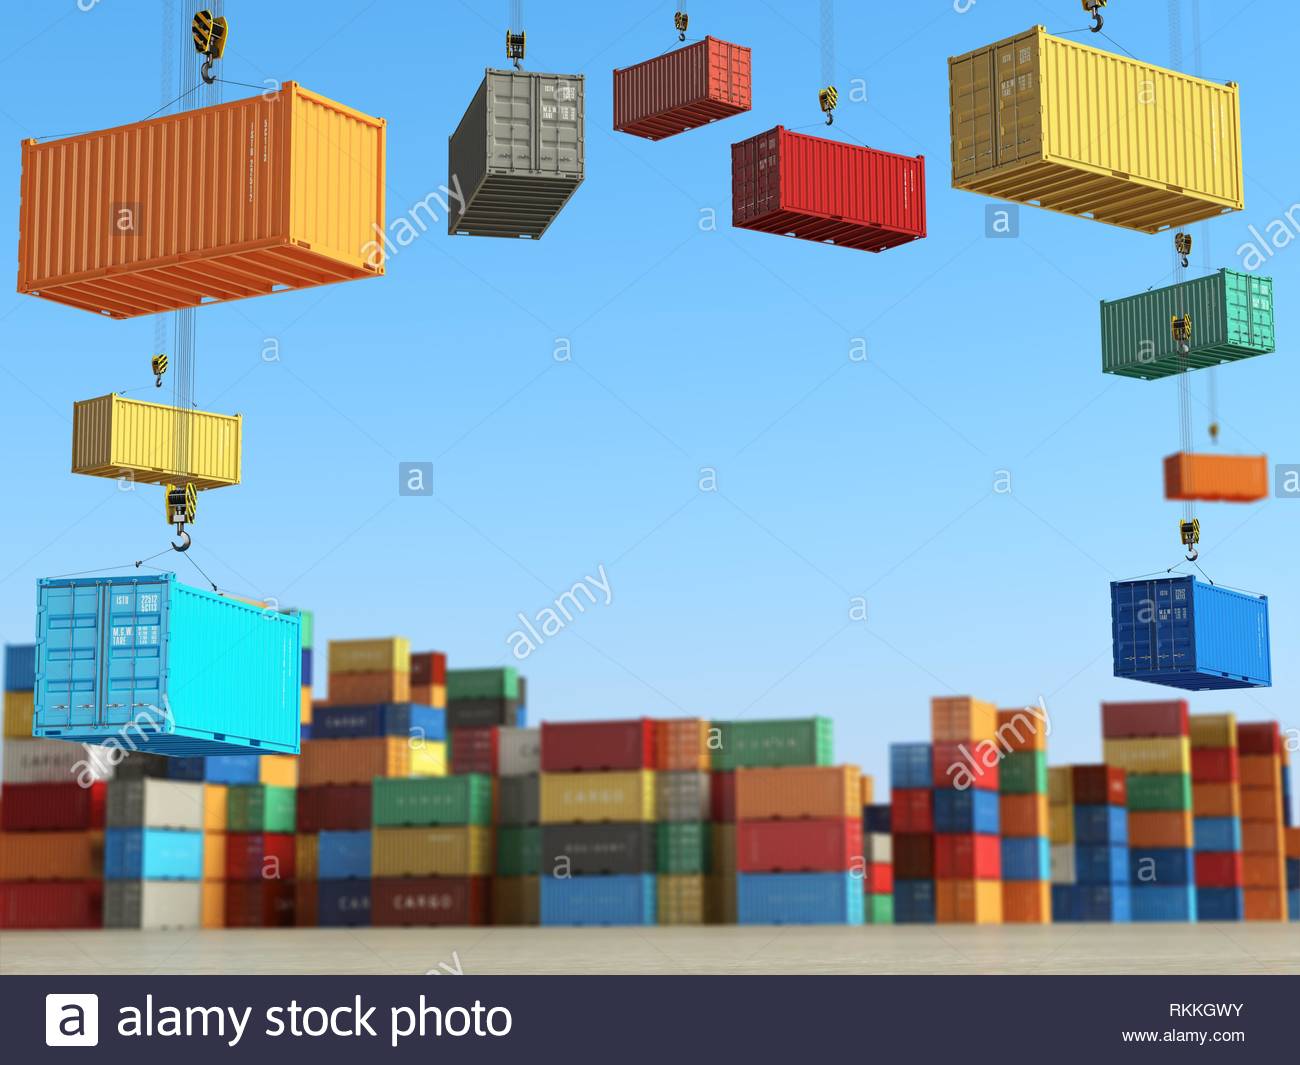 Cargo Containers In Storage Area With Forklifts Delivery Or